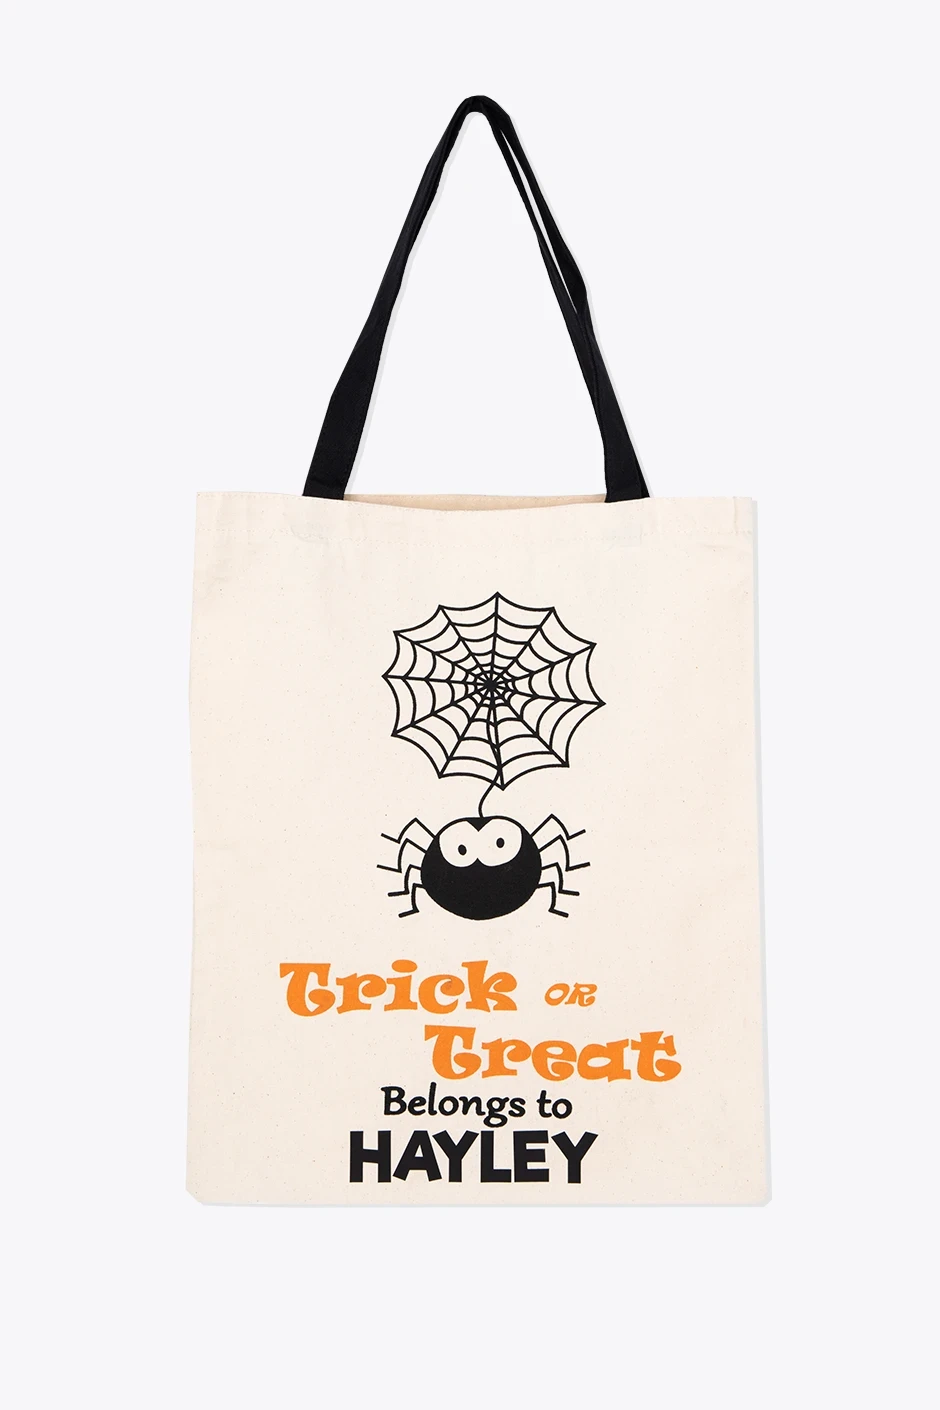 Personalized Trick or Treat Bags with Printable Vinyl